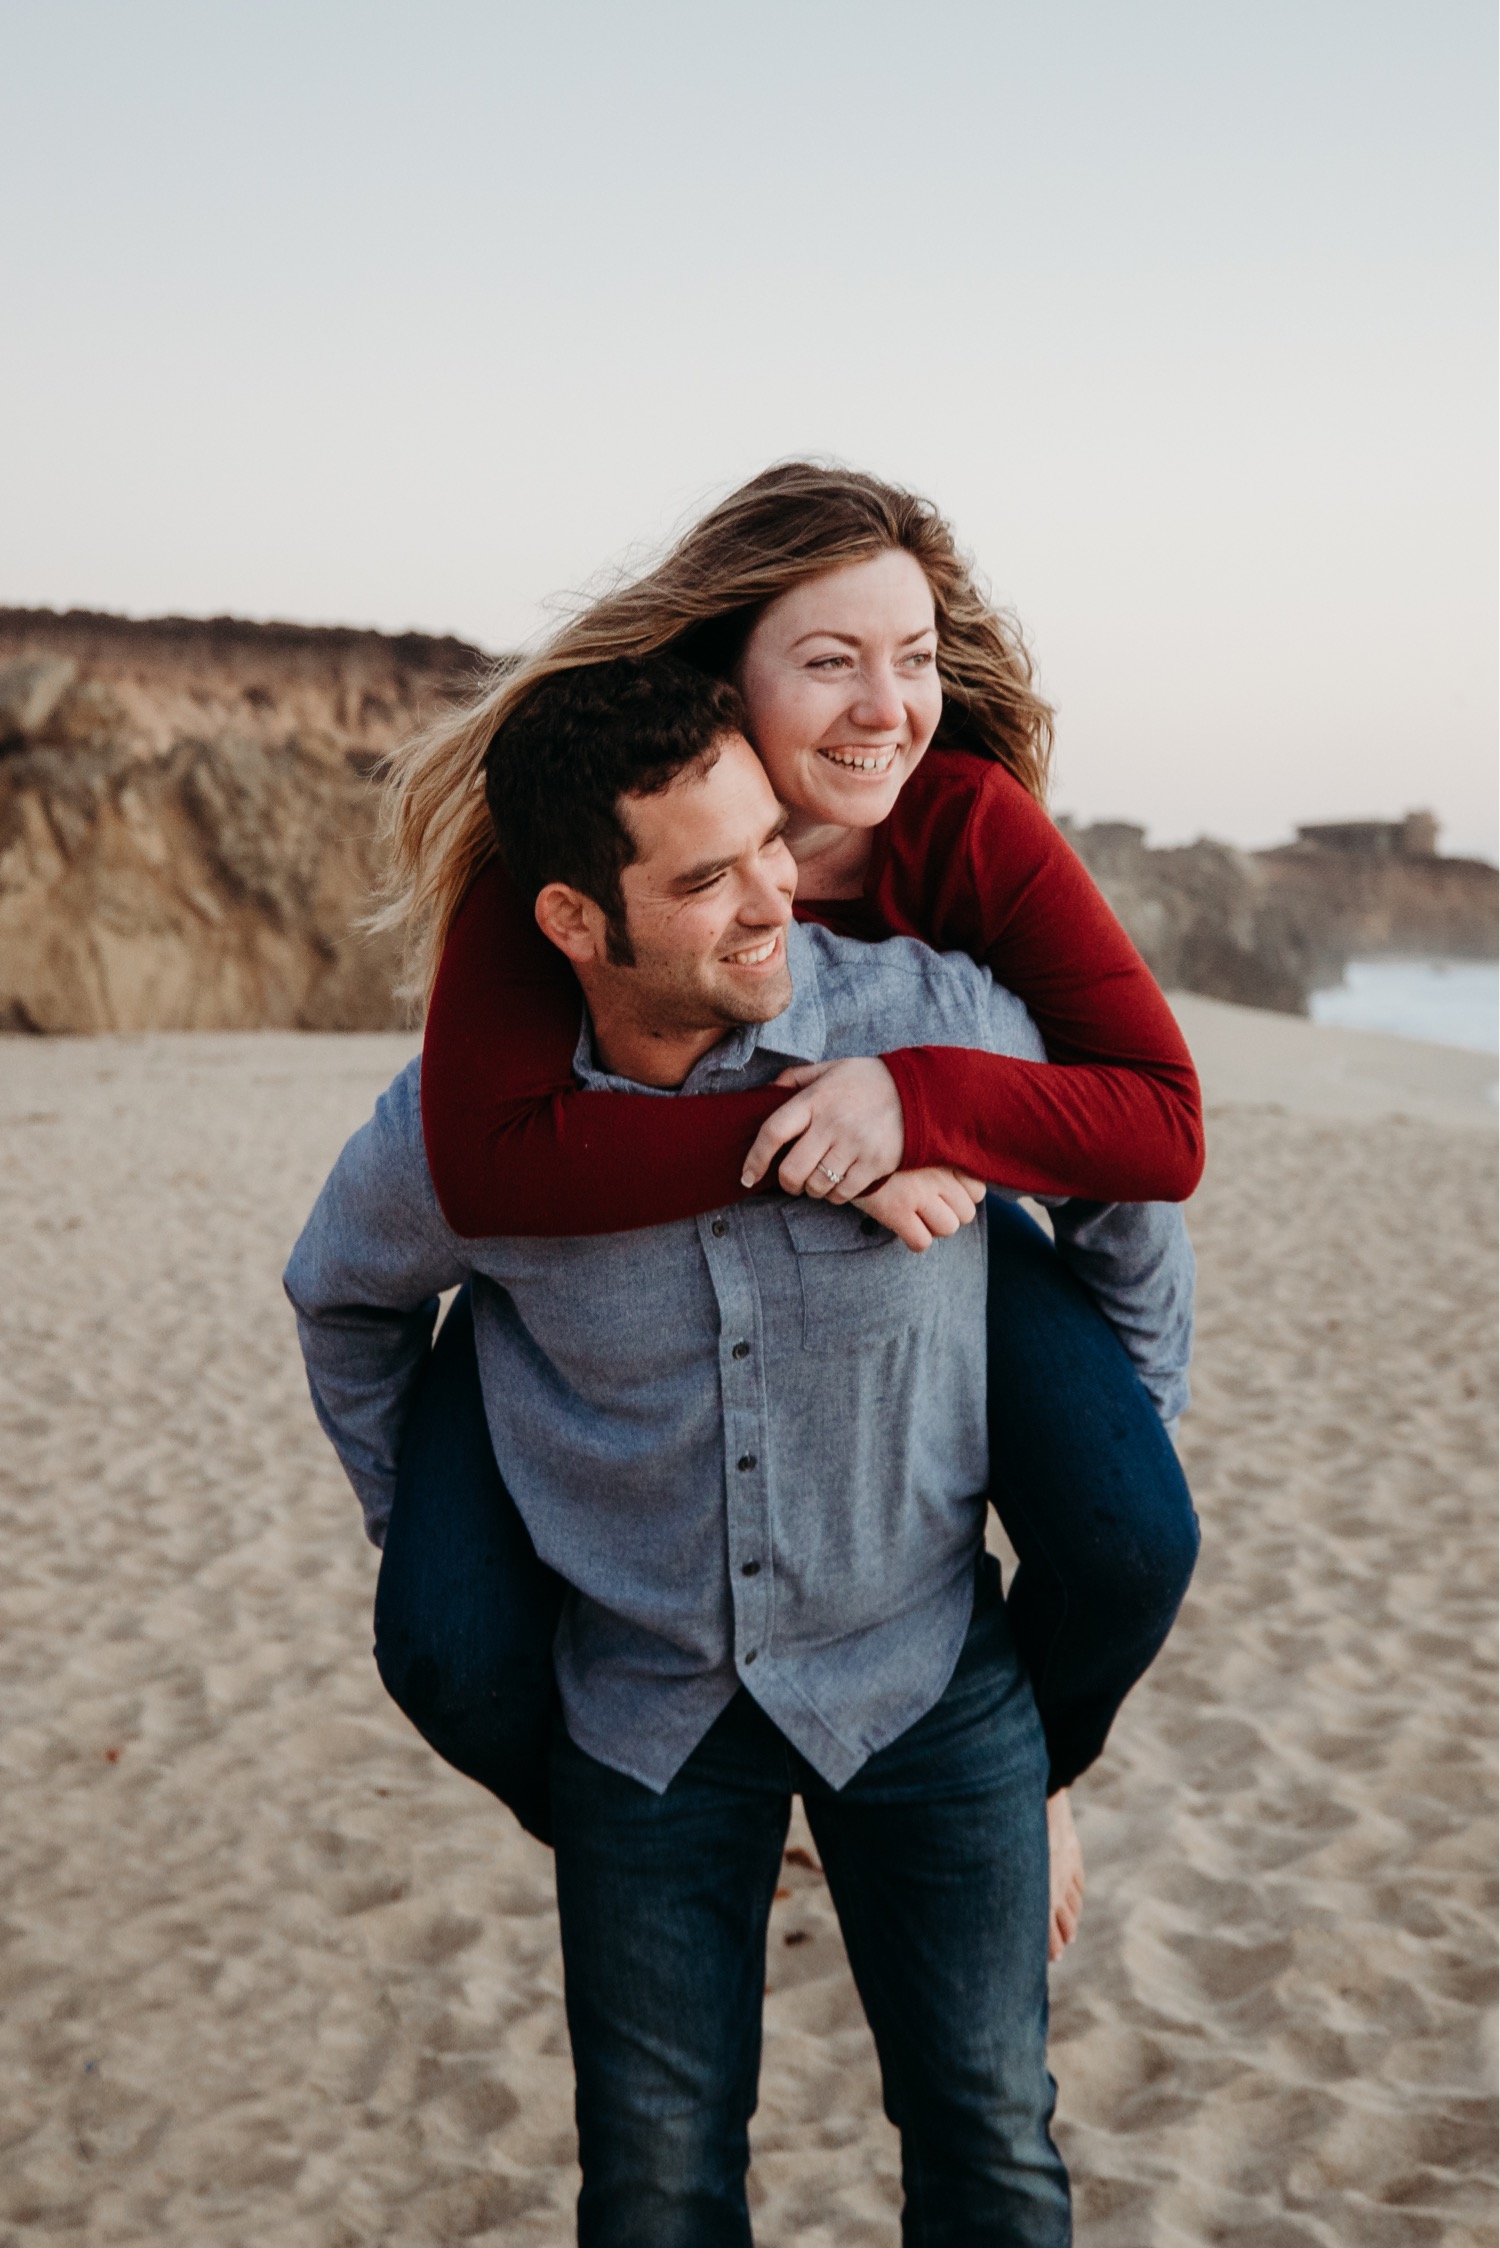 Man gives woman a piggy back ride on the beach in Big Sur as they both look towards the ocean.